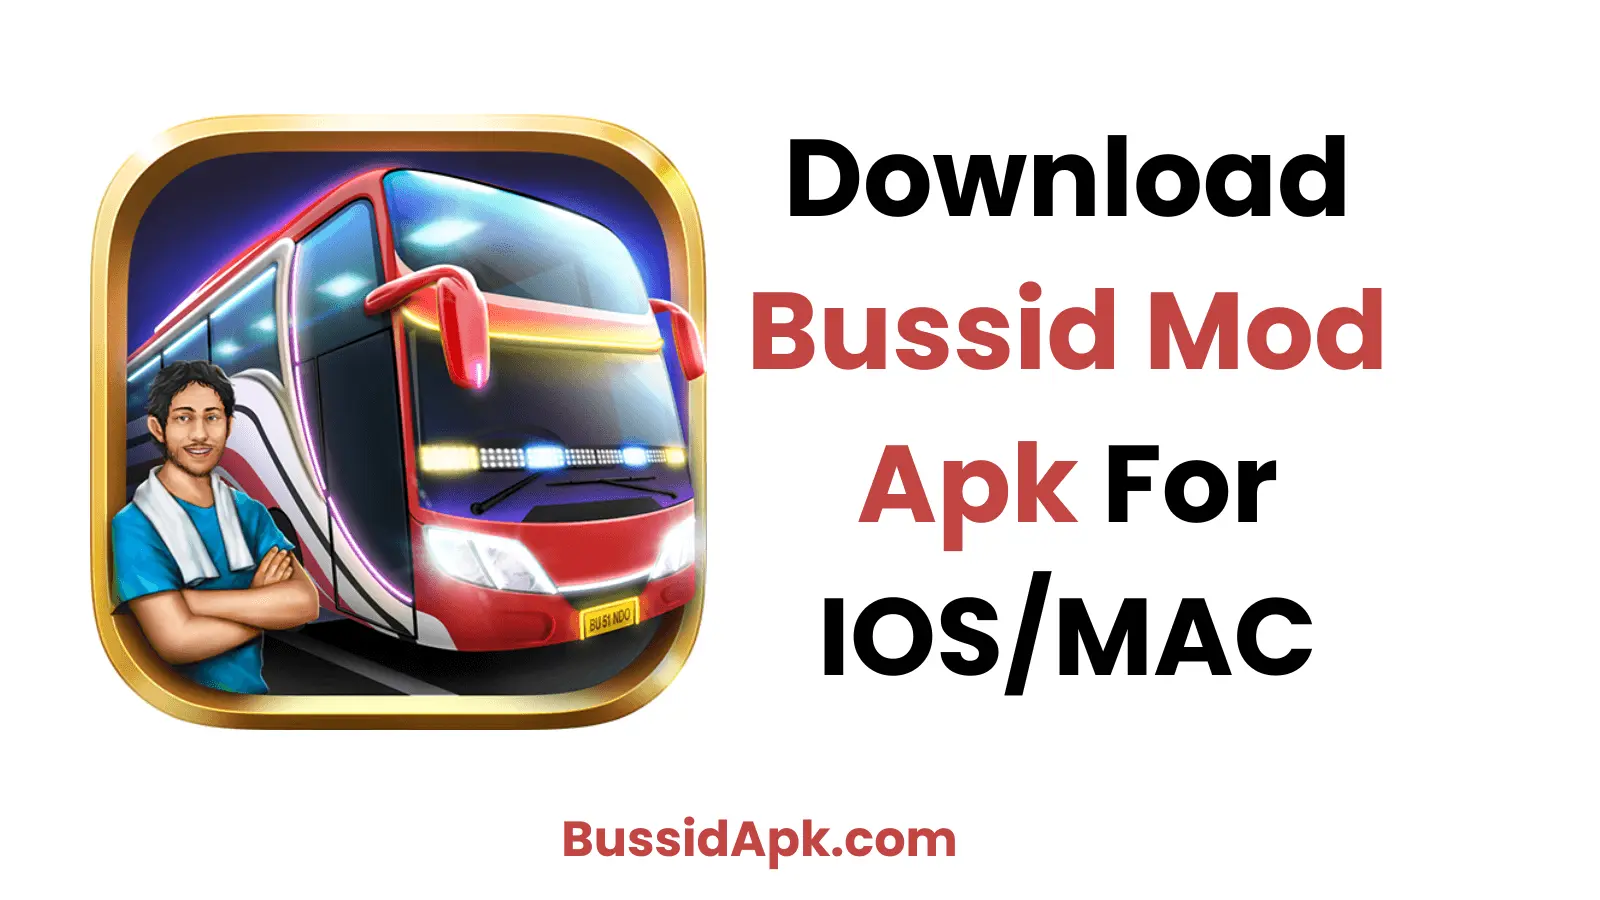 Download Bussid Apk For IOS/Mac